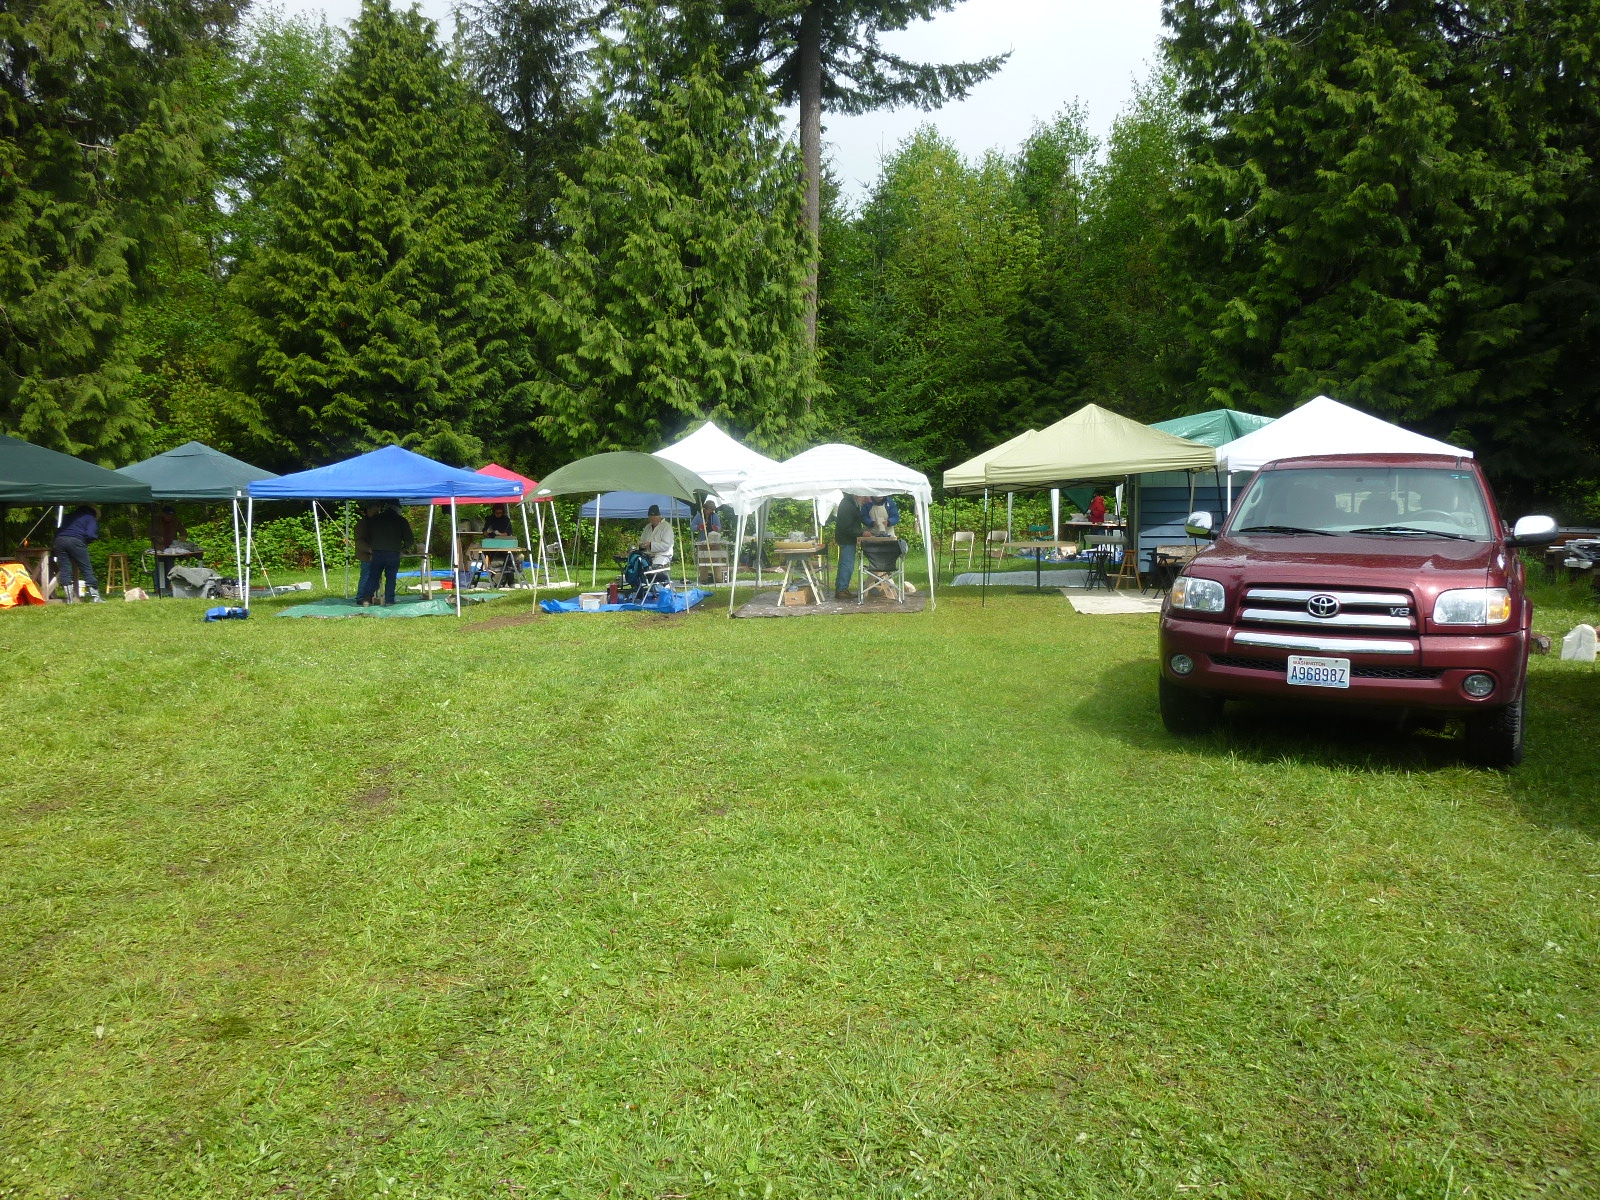 Some of our tents set up on Karla Matzke’s sculpture park grounds. 